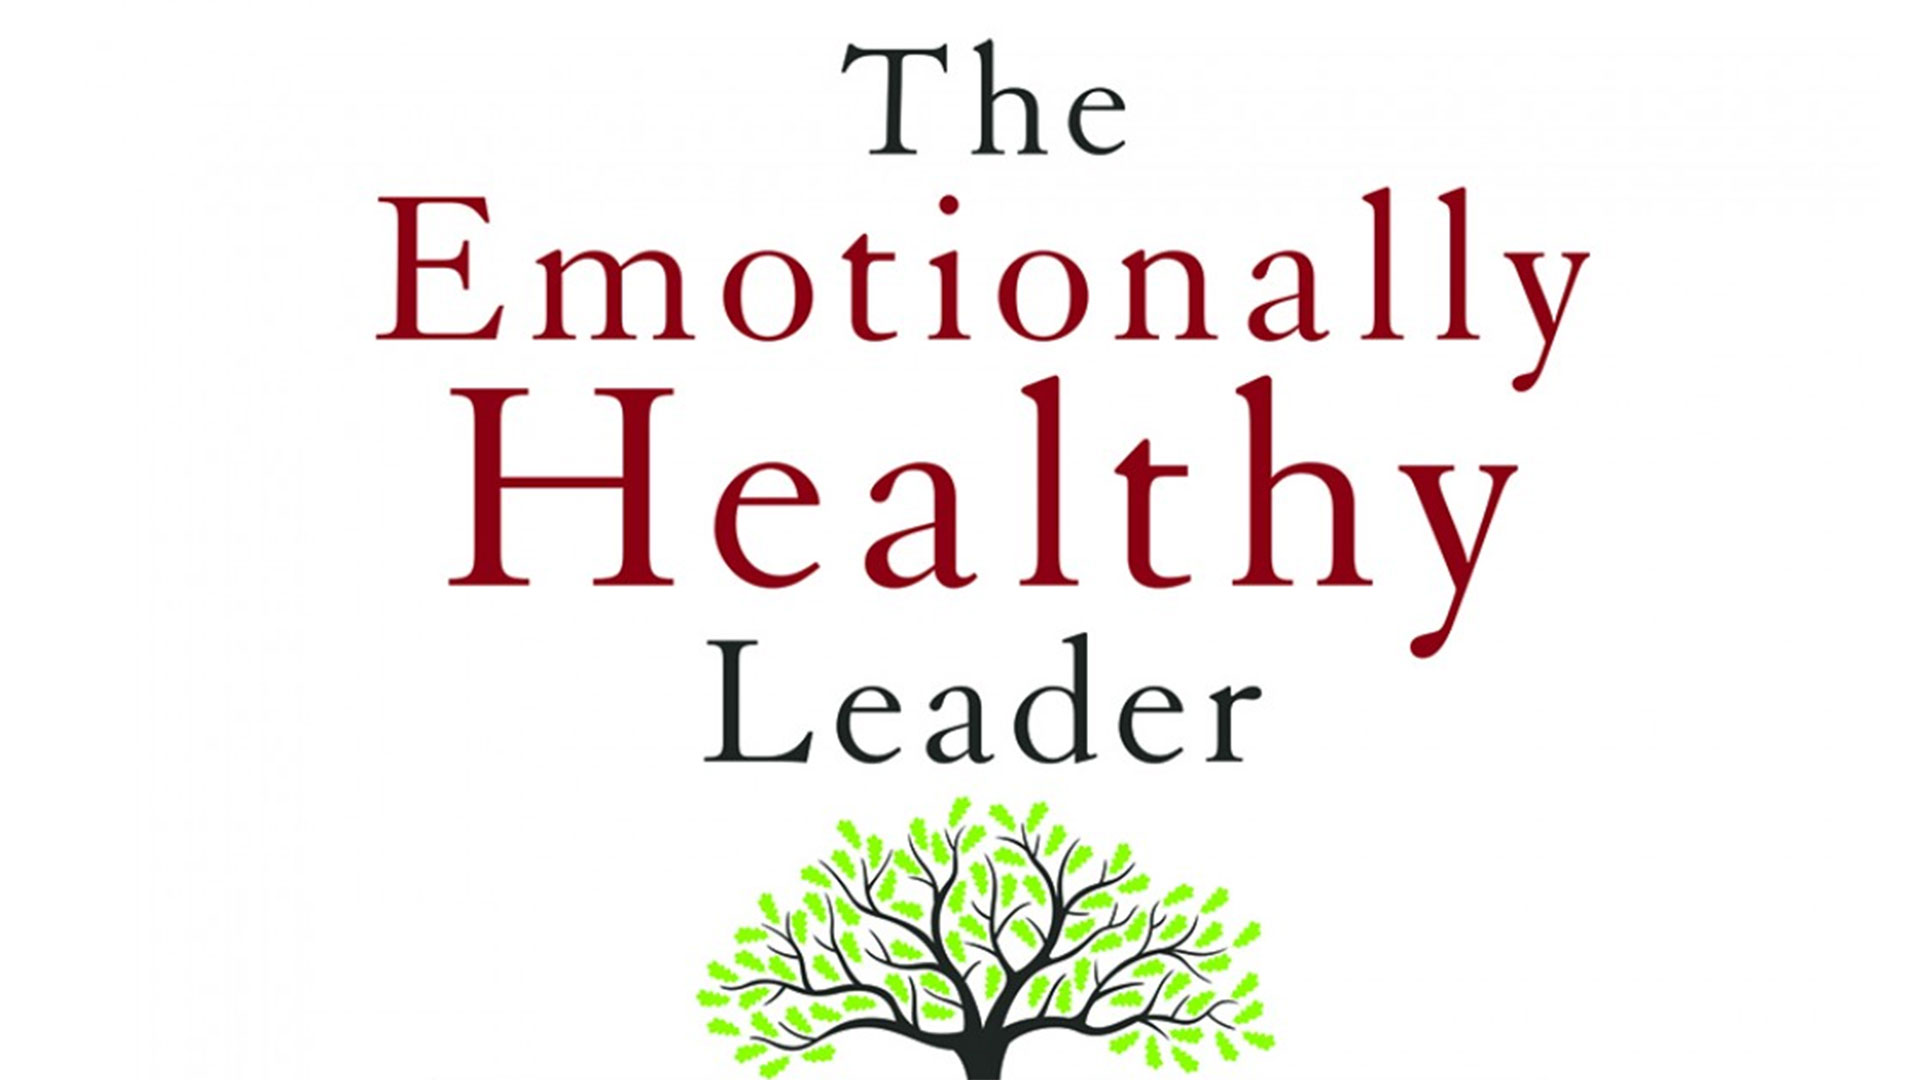 The Emotionally Healthy Leader, by Peter Scazerro